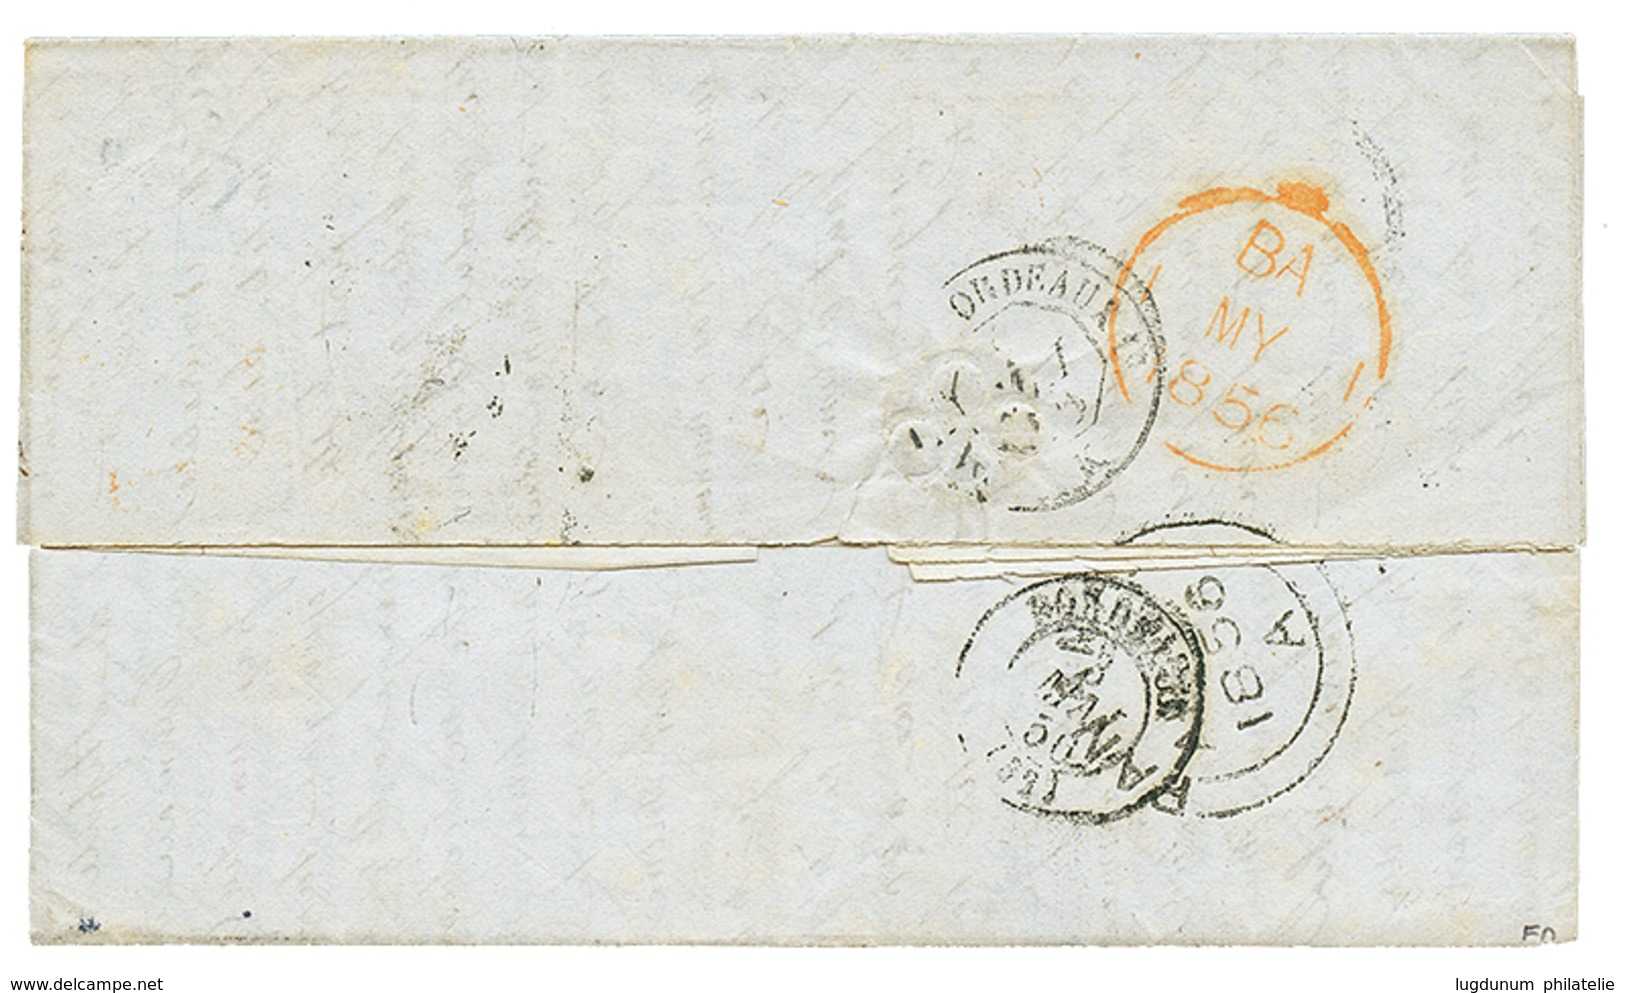 PANAMA : 1856 Rare Exchange Marking COLONIES ART-18 In Red On Entire Letter Datelined "PANAMA" To FRANCE. Vvf. - Panamá